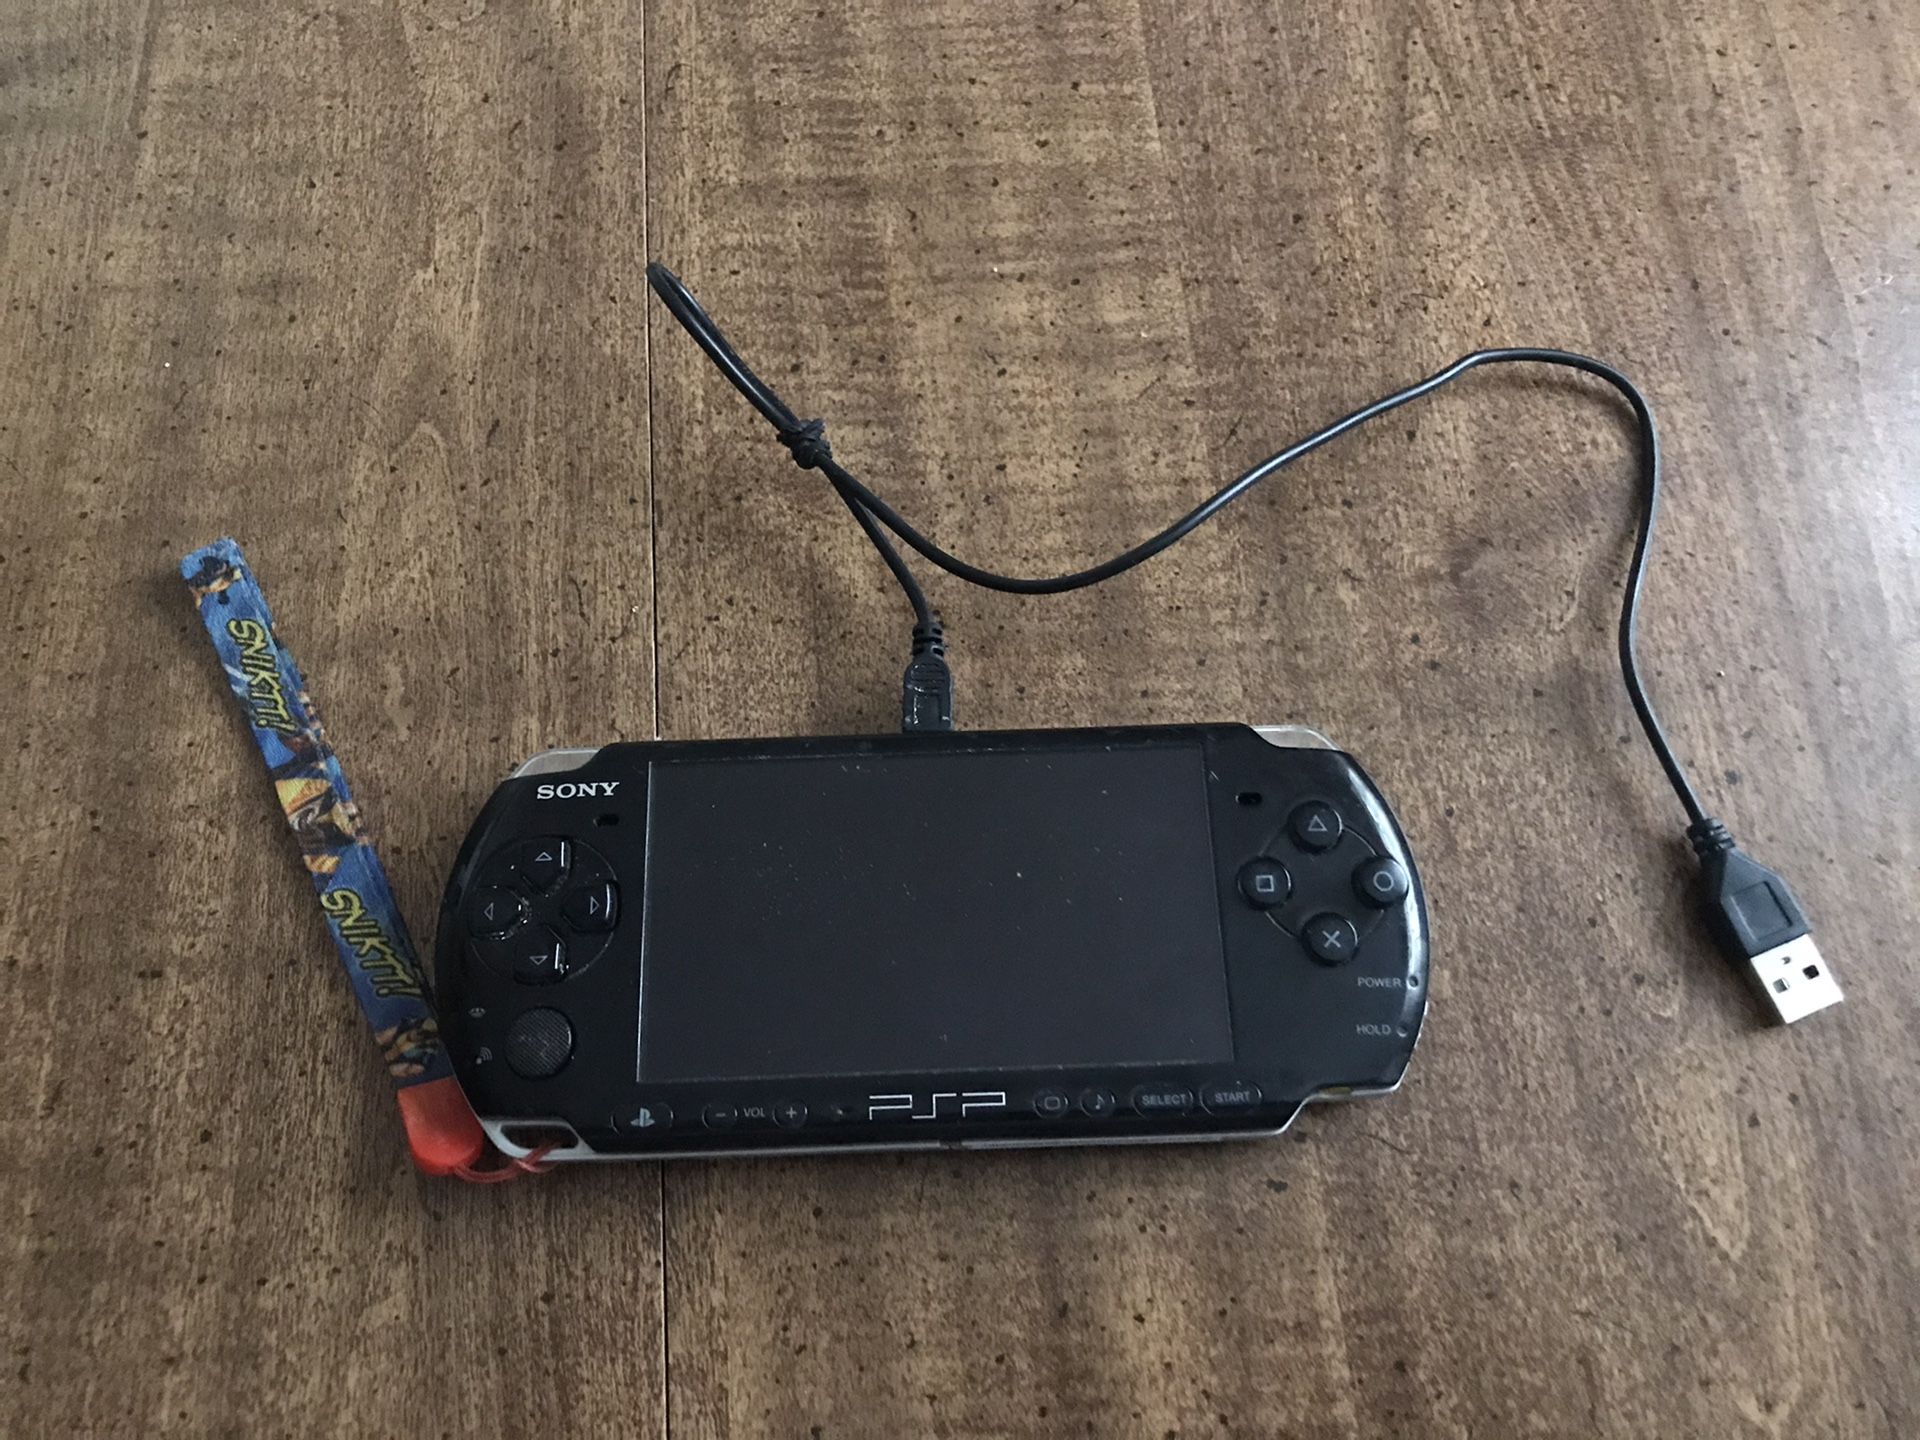 PSP without battery